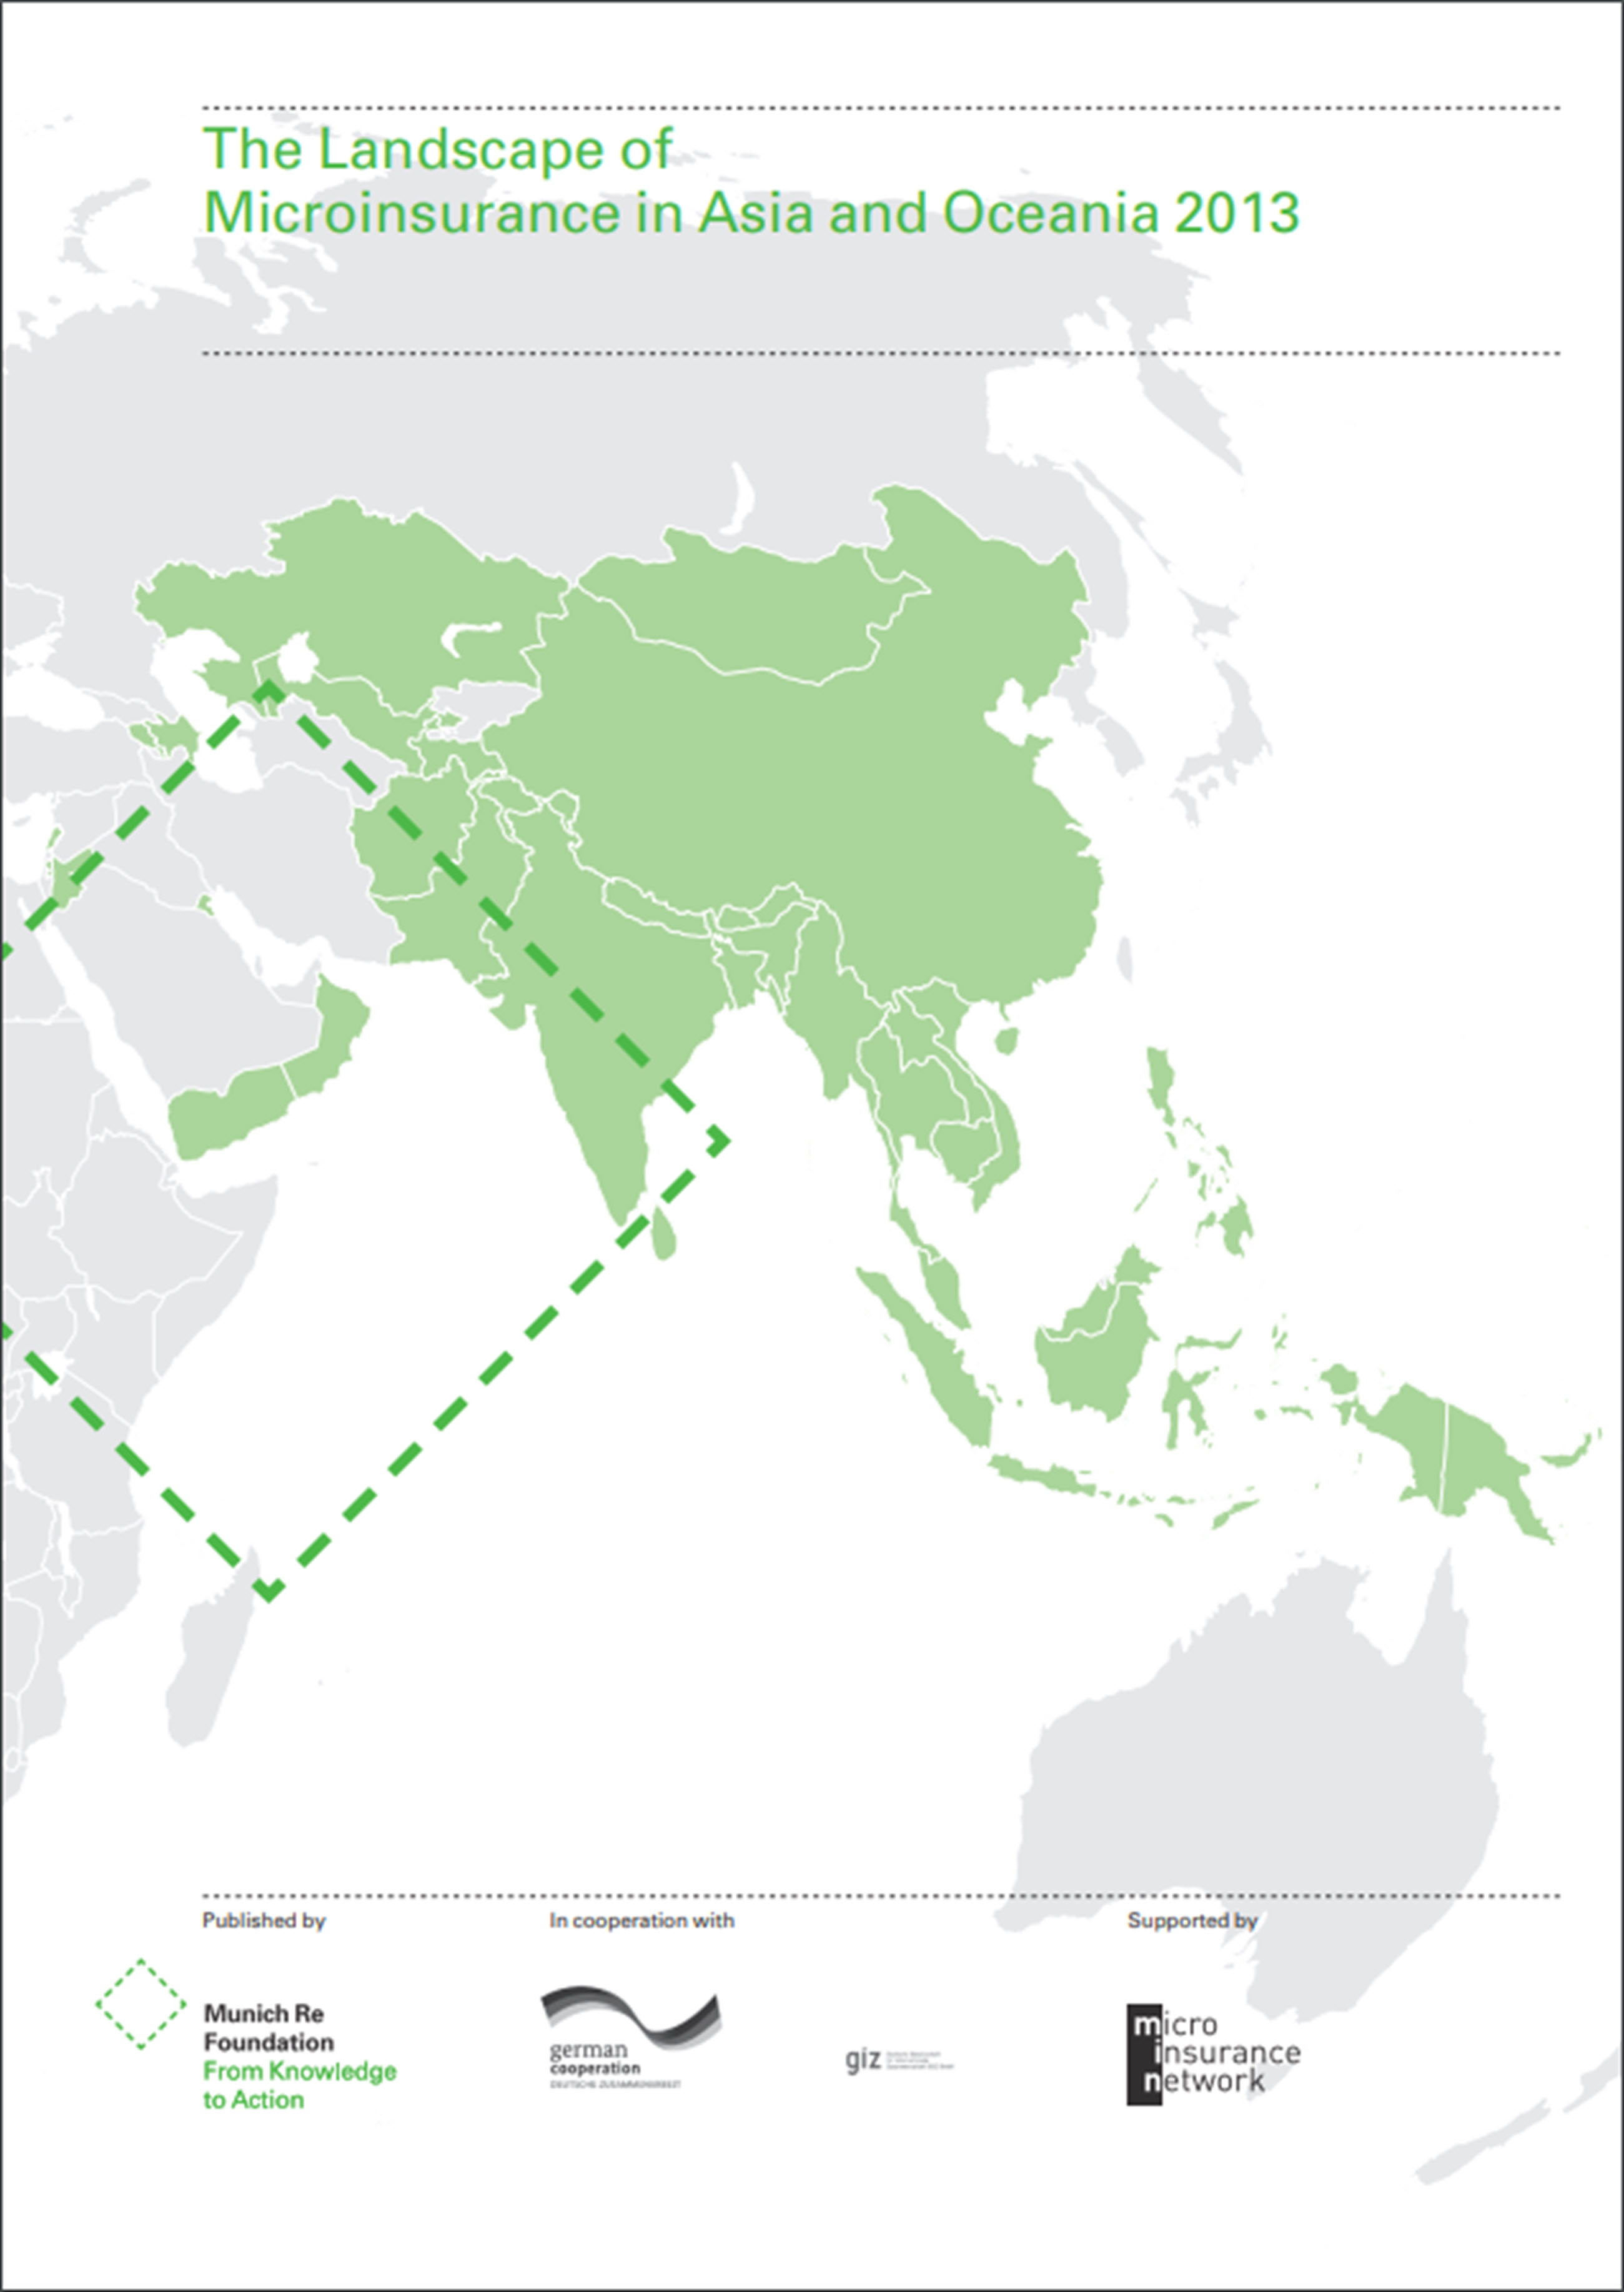 The landscape of microinsurance in Asia and Oceania 2013